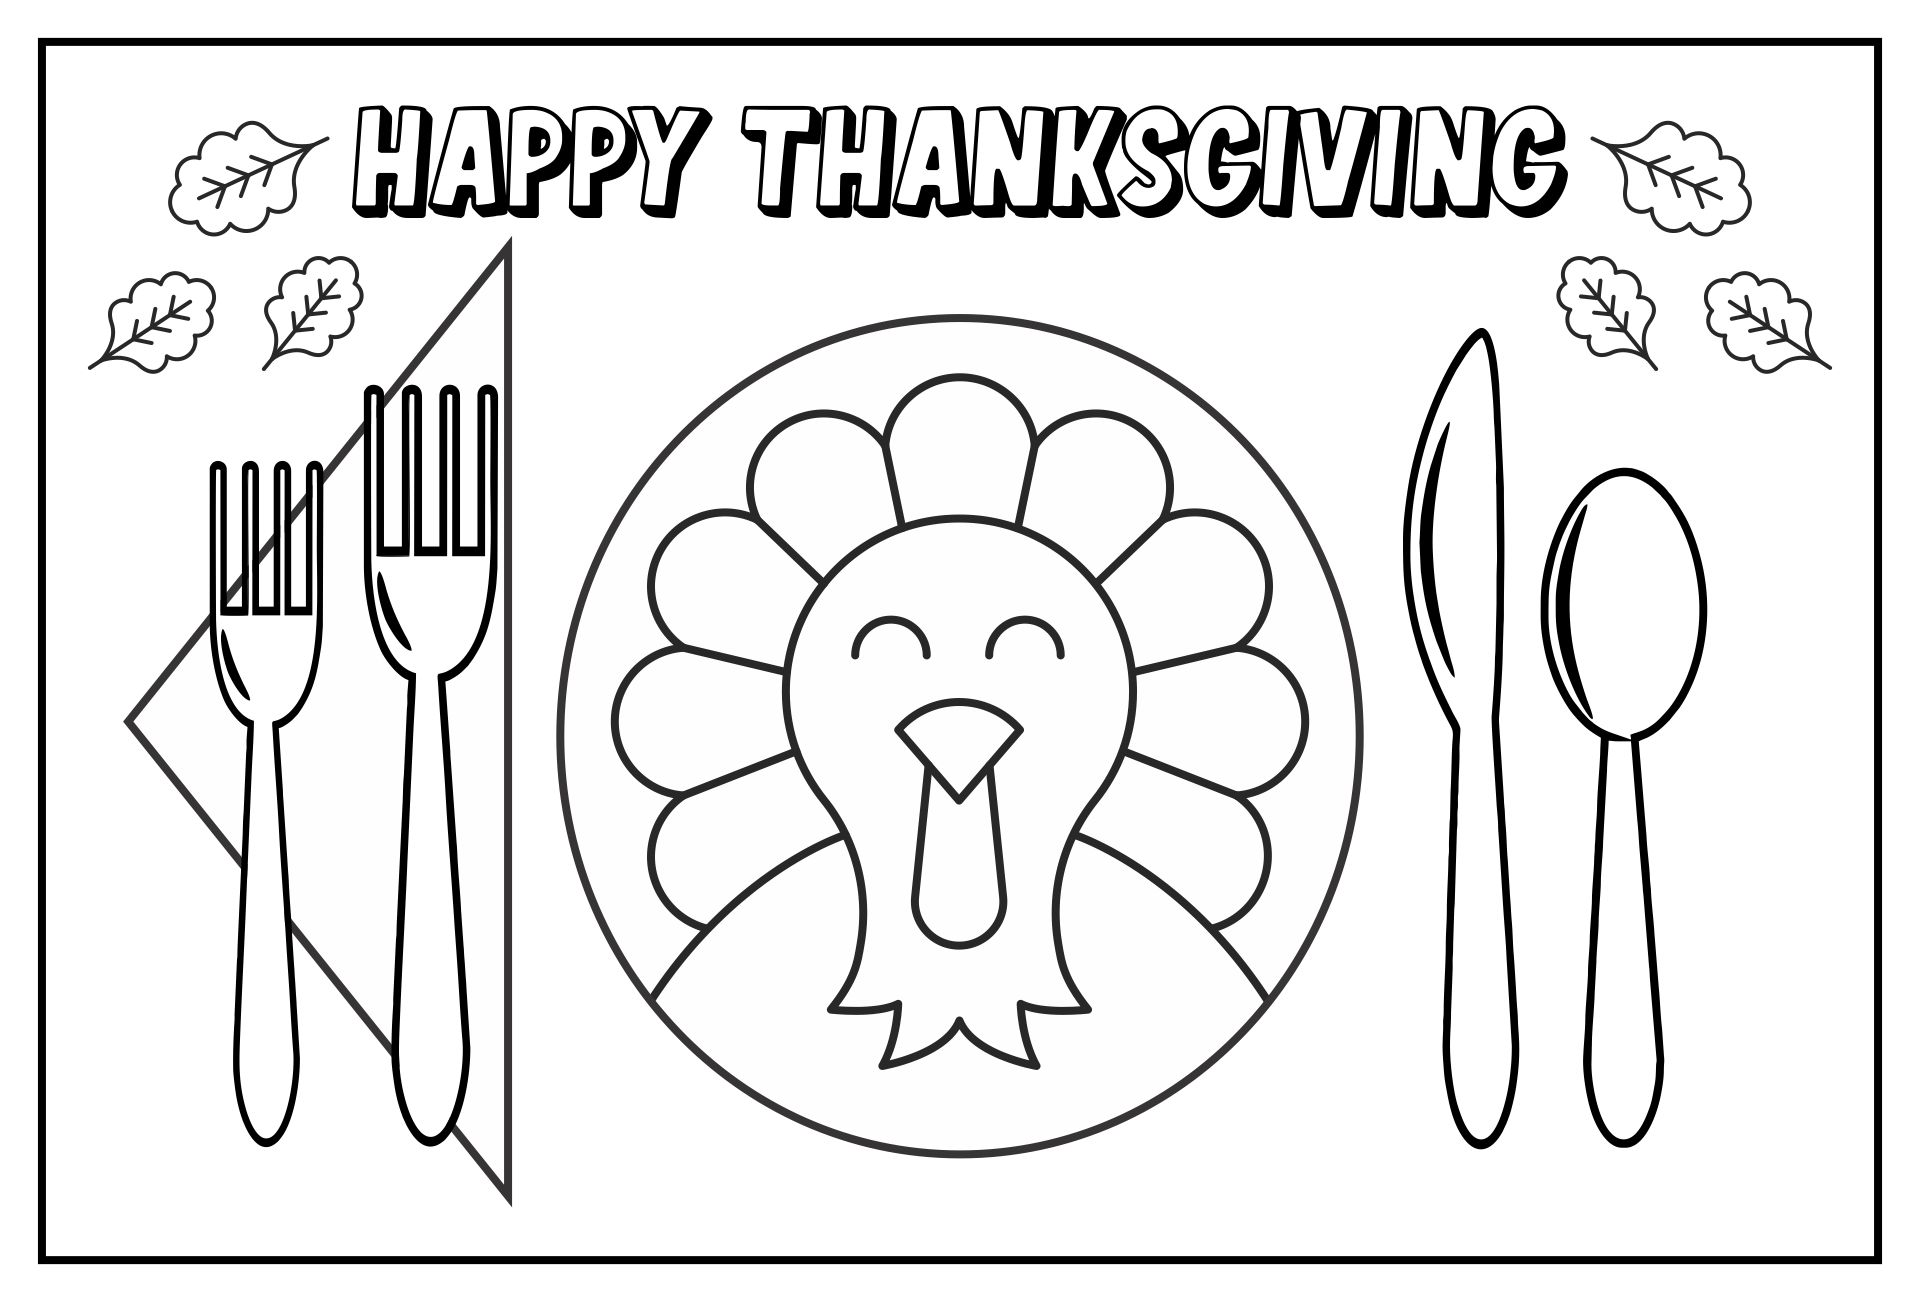 Festive & Fun Thanksgiving Coloring Pages And Placemats For Kids